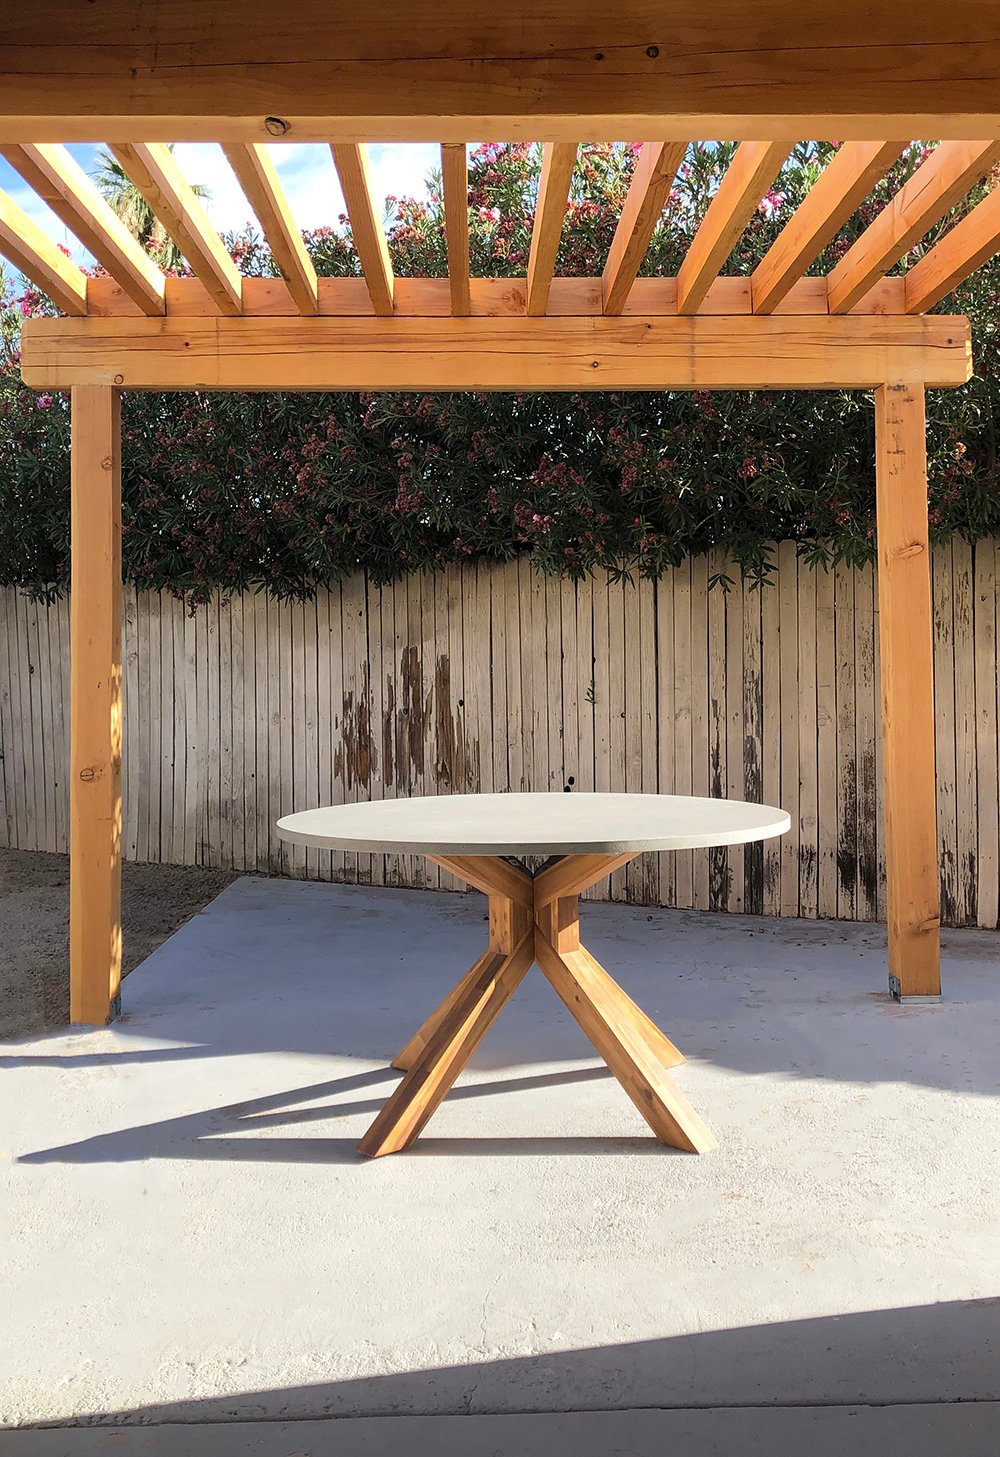 Round Table Outdoor Dining Options - roomfortuesday.com